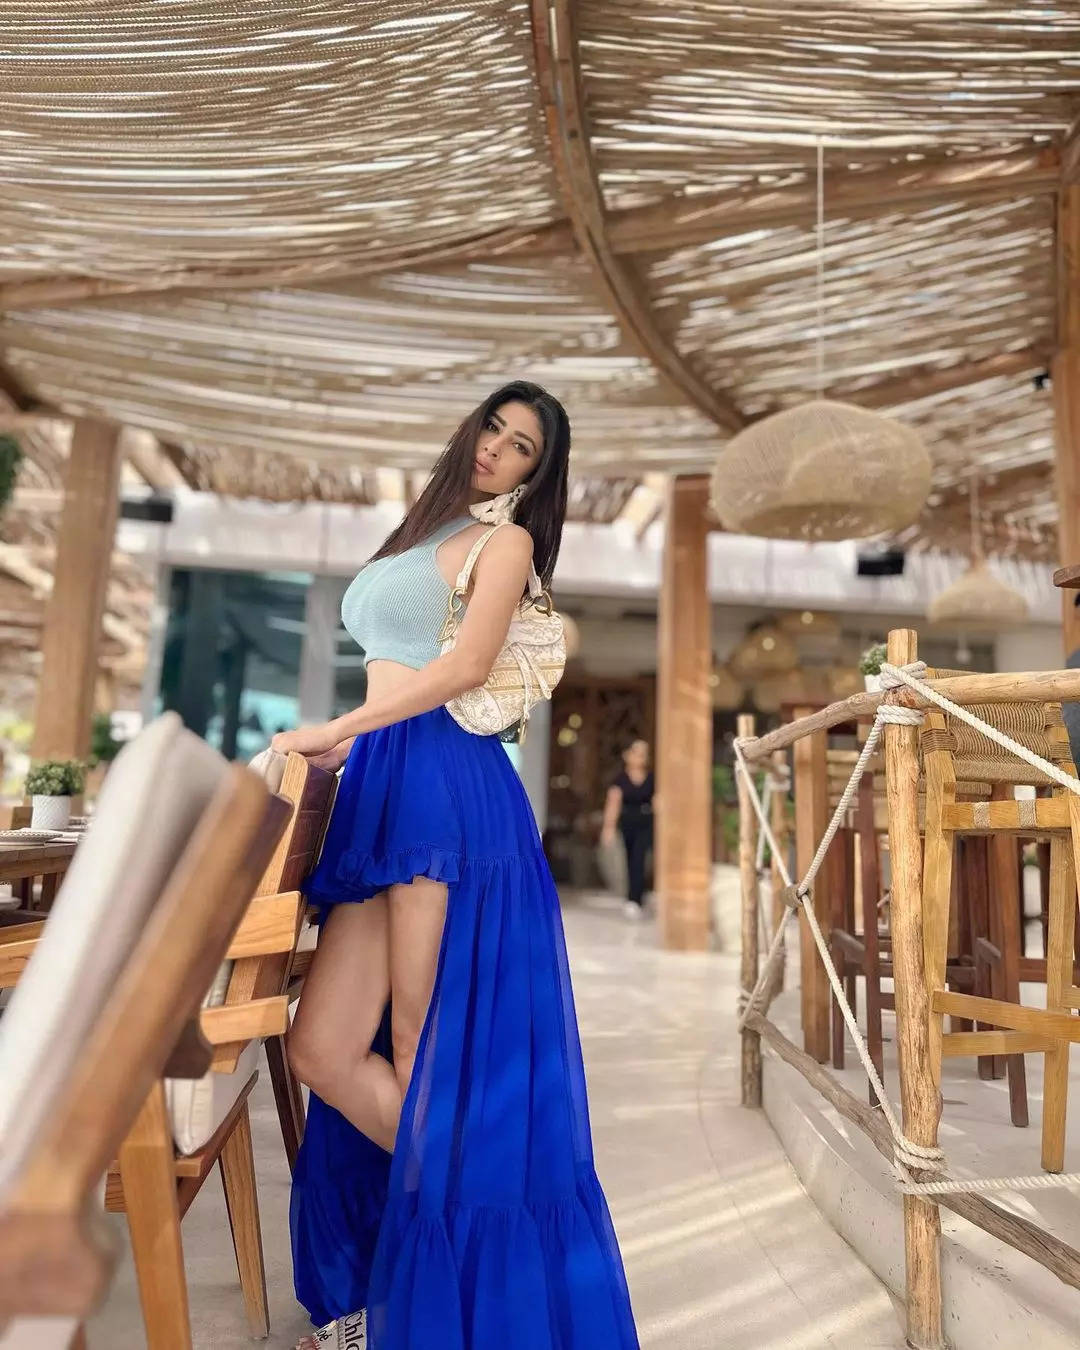 Latest pictures of actress Mouni Roy go viral on social media